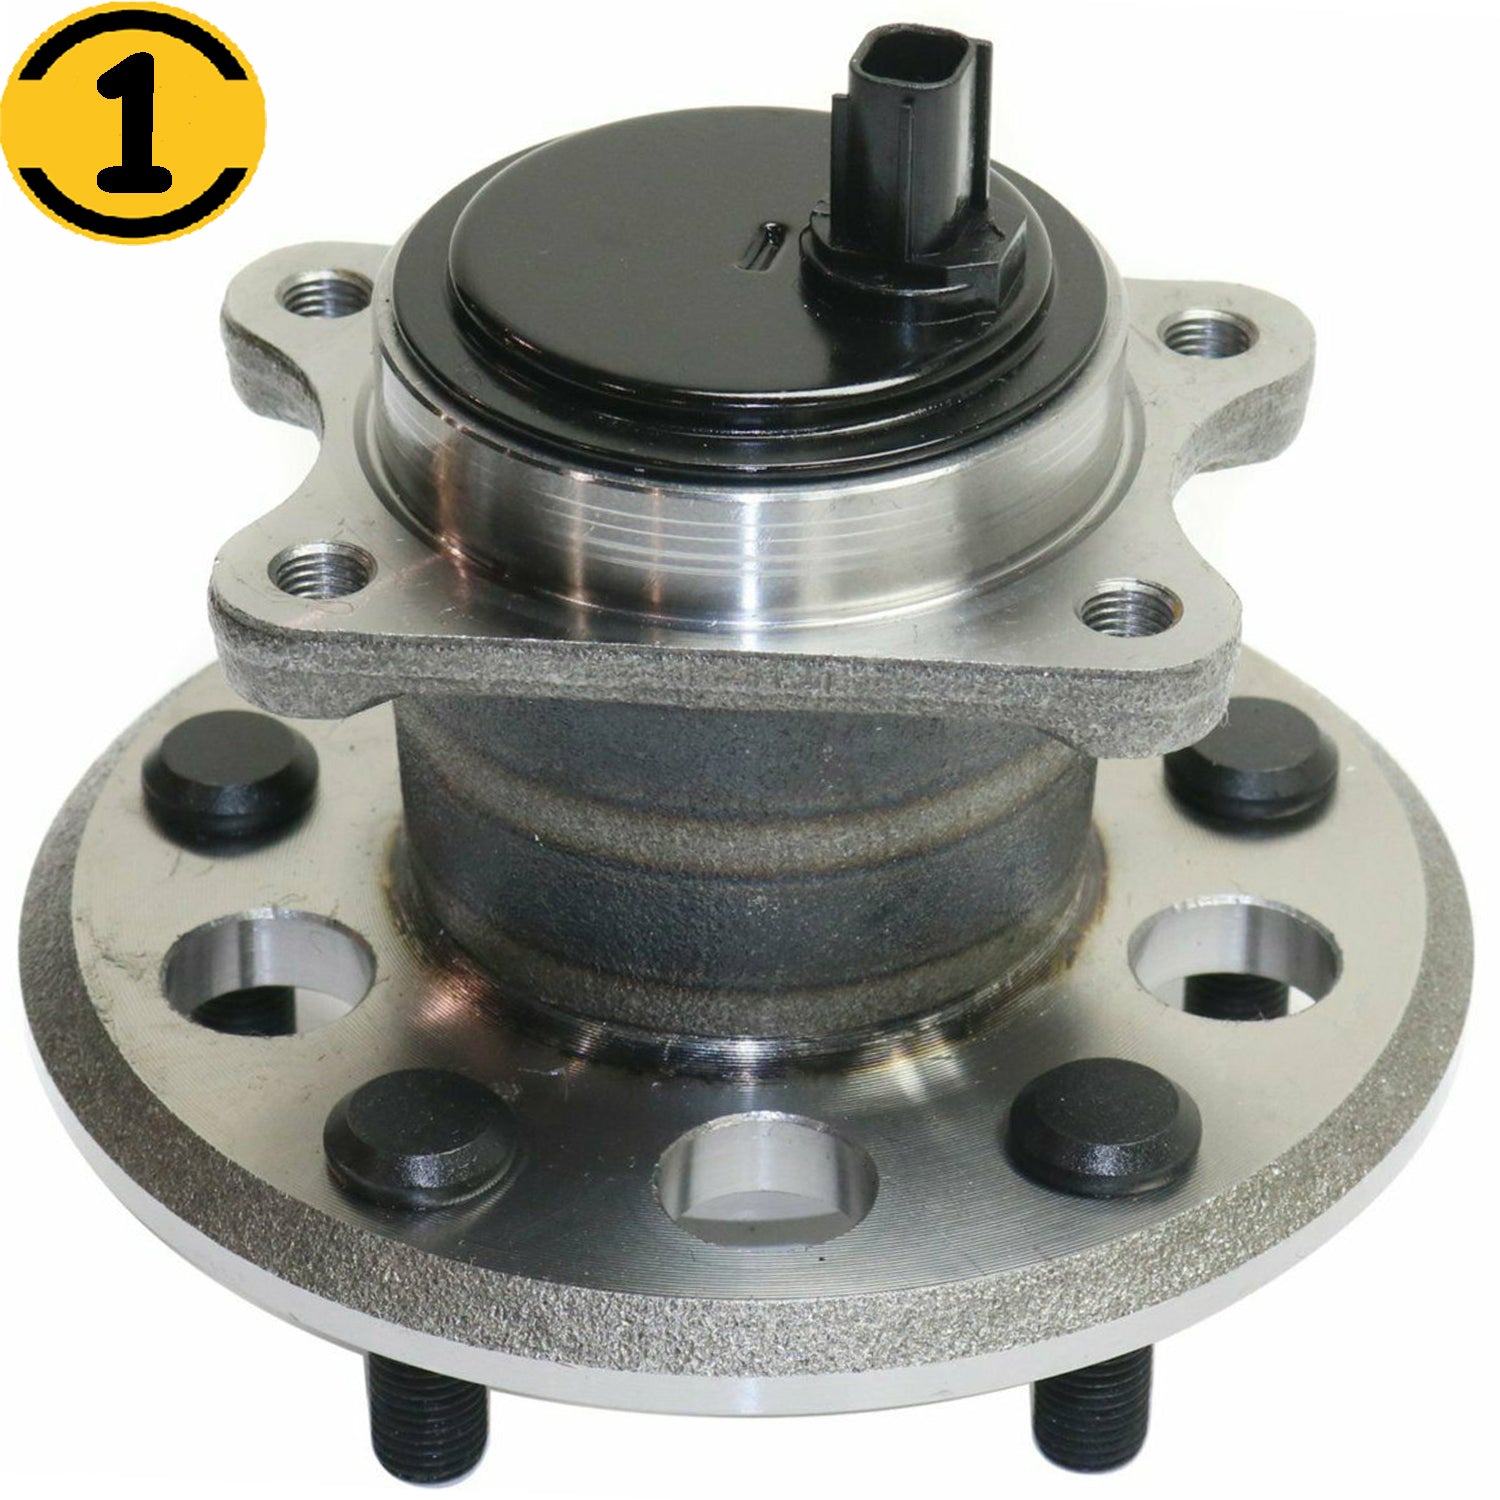 MotorbyMotor 512455 Rear Passenger Wheel Bearing and Hub Assembly with 5 Lugs Fits for 2013-2018 Toyota Avalon, 2012-2017 Toyota Camry Low-Runout OE Directly Replacement Hub Bearing (w/ABS, Right LH) MotorbyMotor